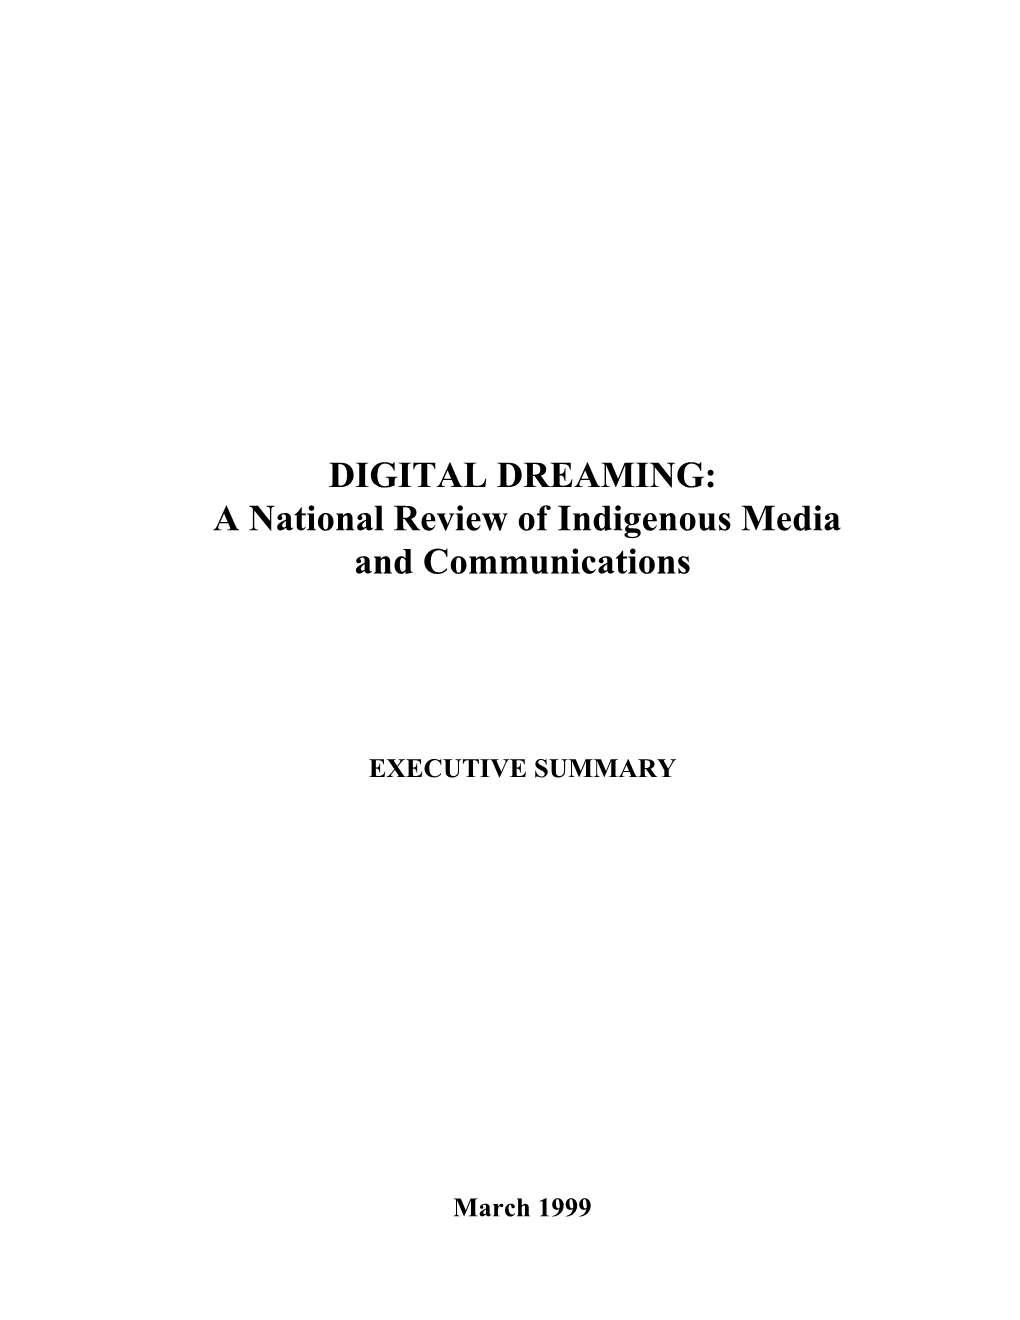 DIGITAL DREAMING: a National Review of Indigenous Media and Communications